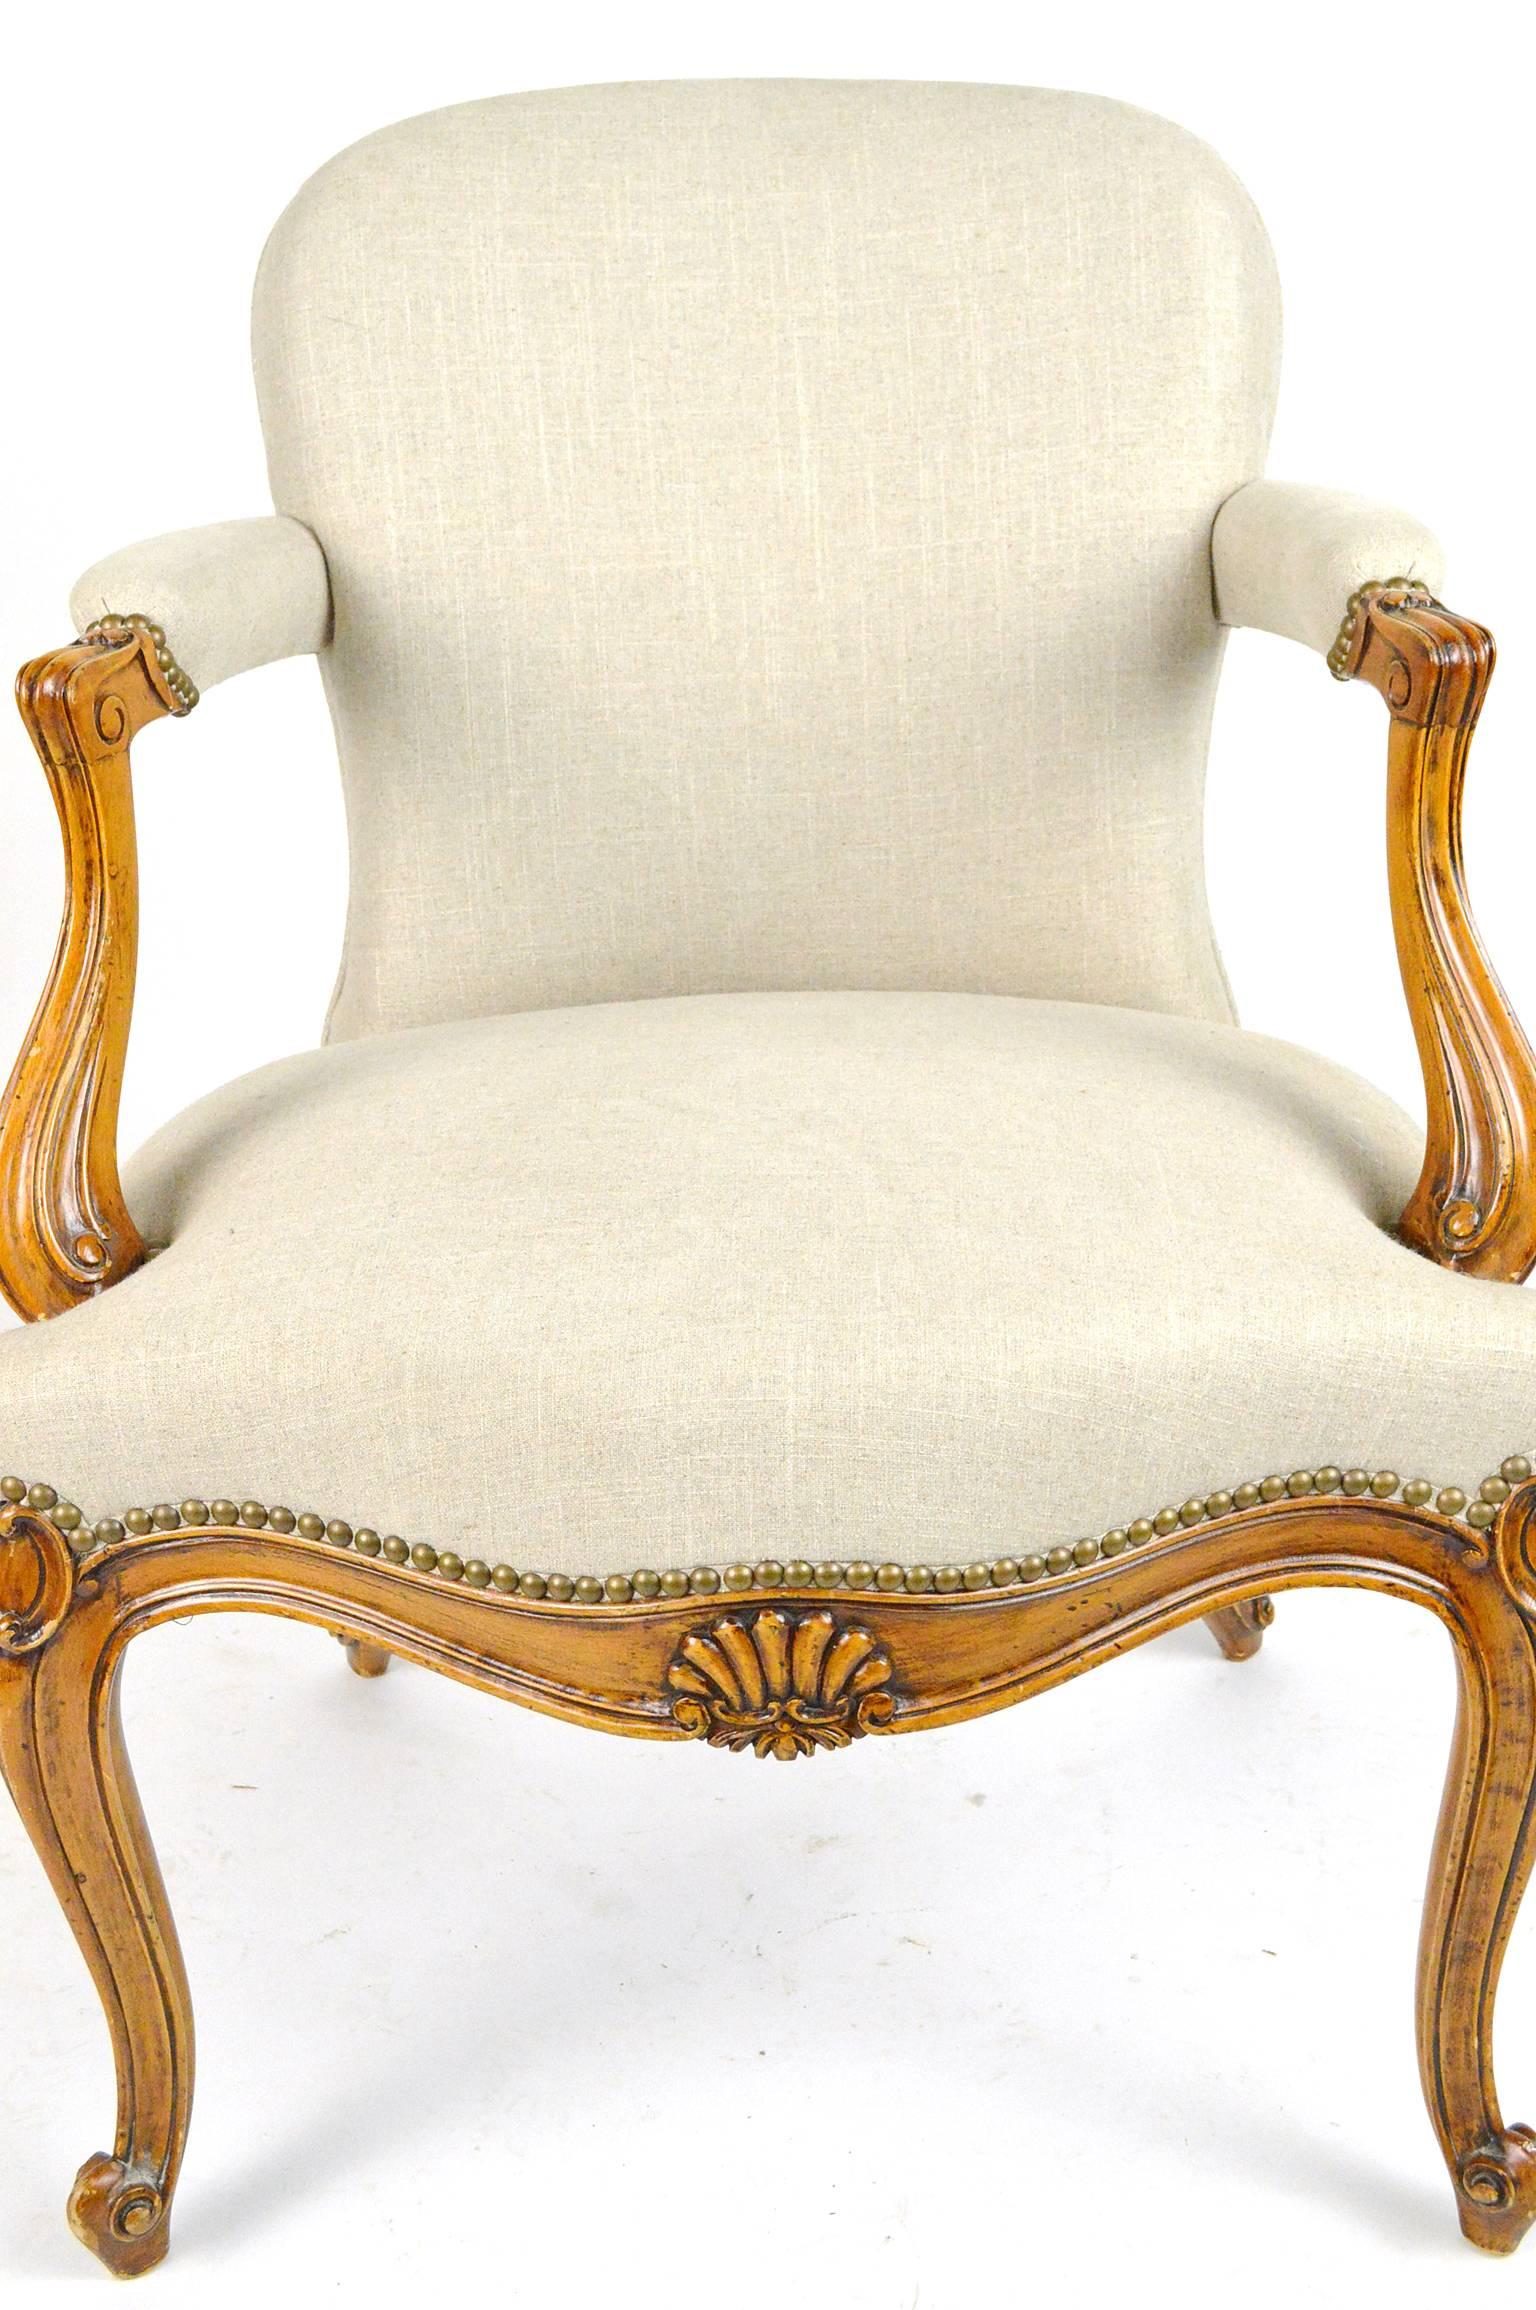 19th Century French Regency Style Carved Open Armchair For Sale 2